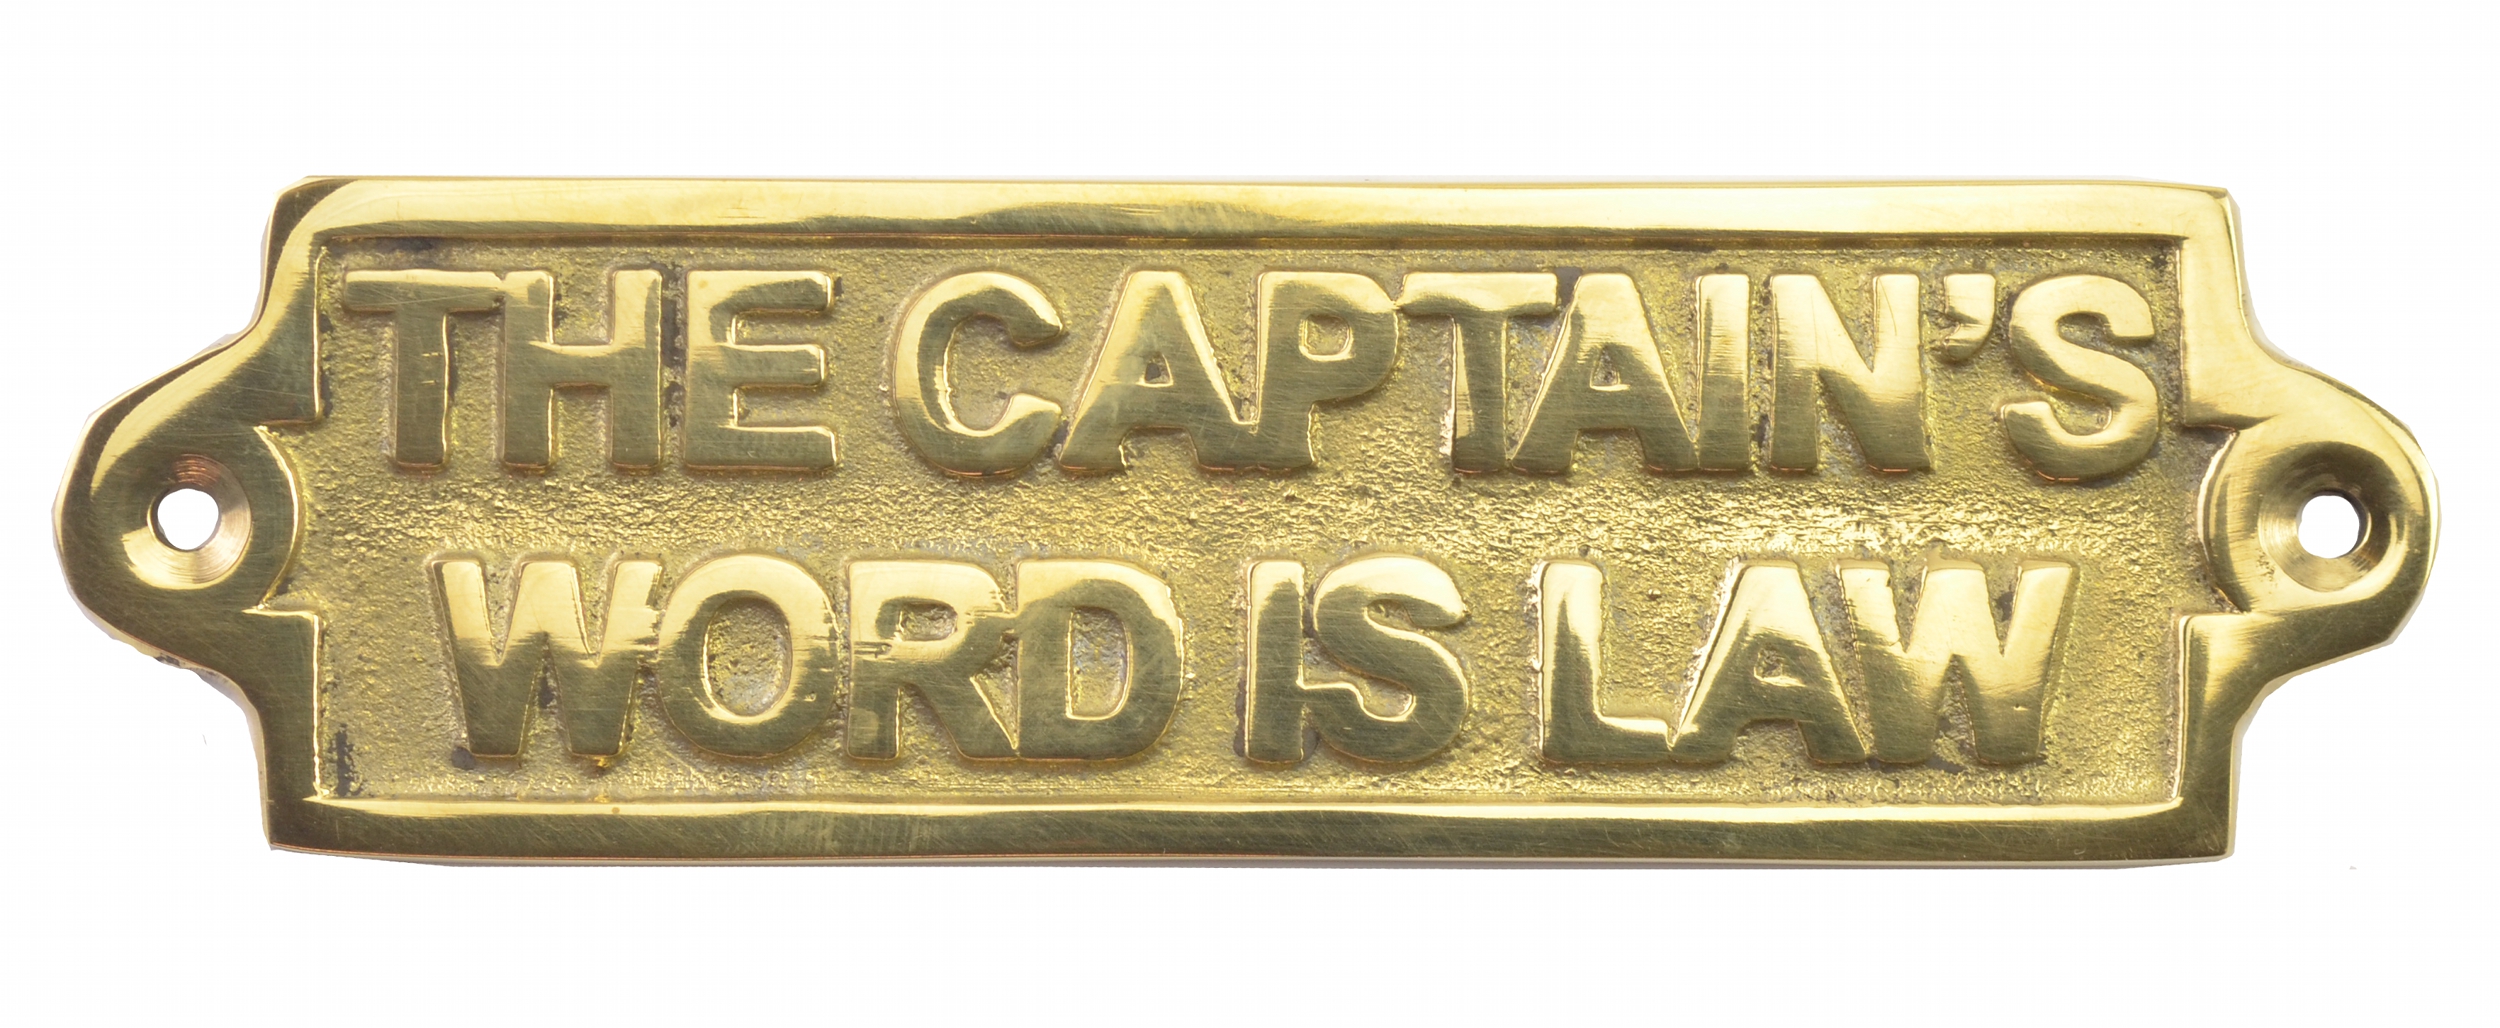 Nautical Brass "THE CAPTAIN WORD IS LAW" Plaque or Sign Home Decorative Plaque 